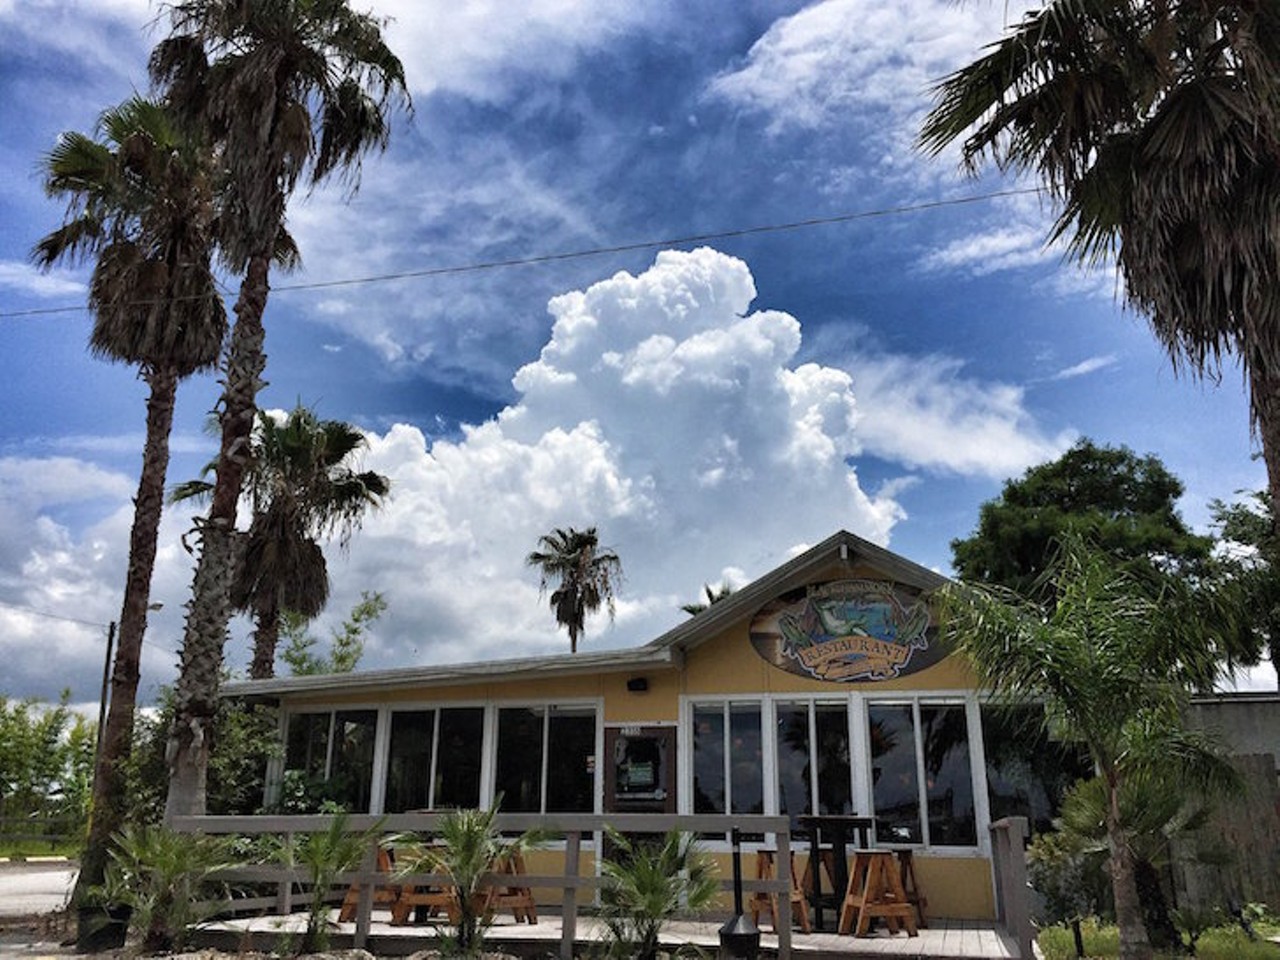 The Black Hammock
2356 Black Hammock Fish Camp Road, Oviedo, 407-805-1824
This Oviedo favorite restaurant and bar also features a marina and airboat rides!
Photo via Black Hammock/FB